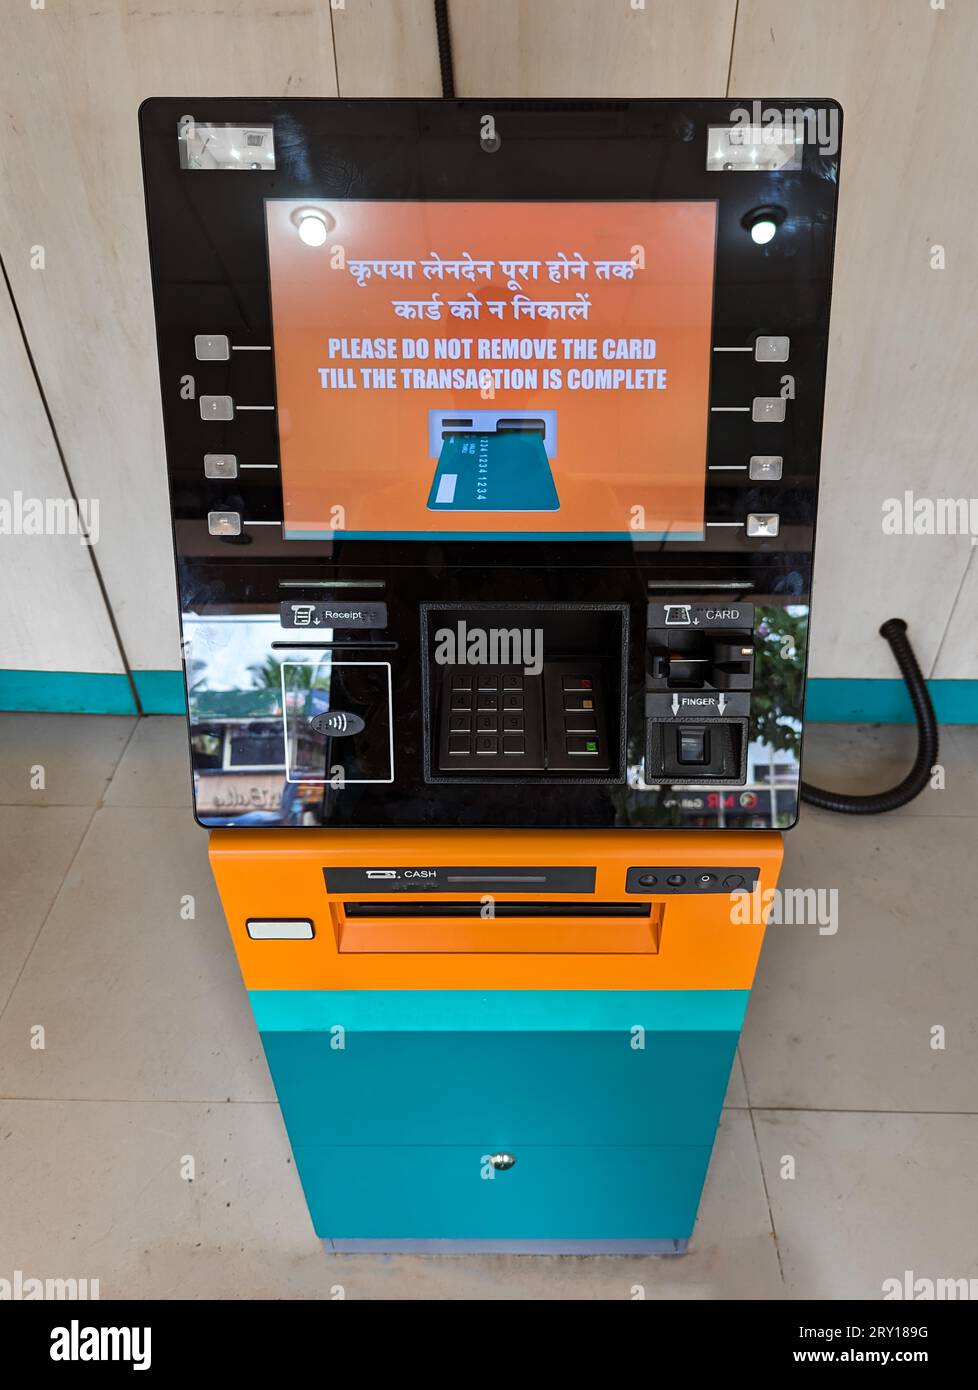 a digital automatic teller machine (ATM) for cash withdraw and deposit transactions Stock Photo